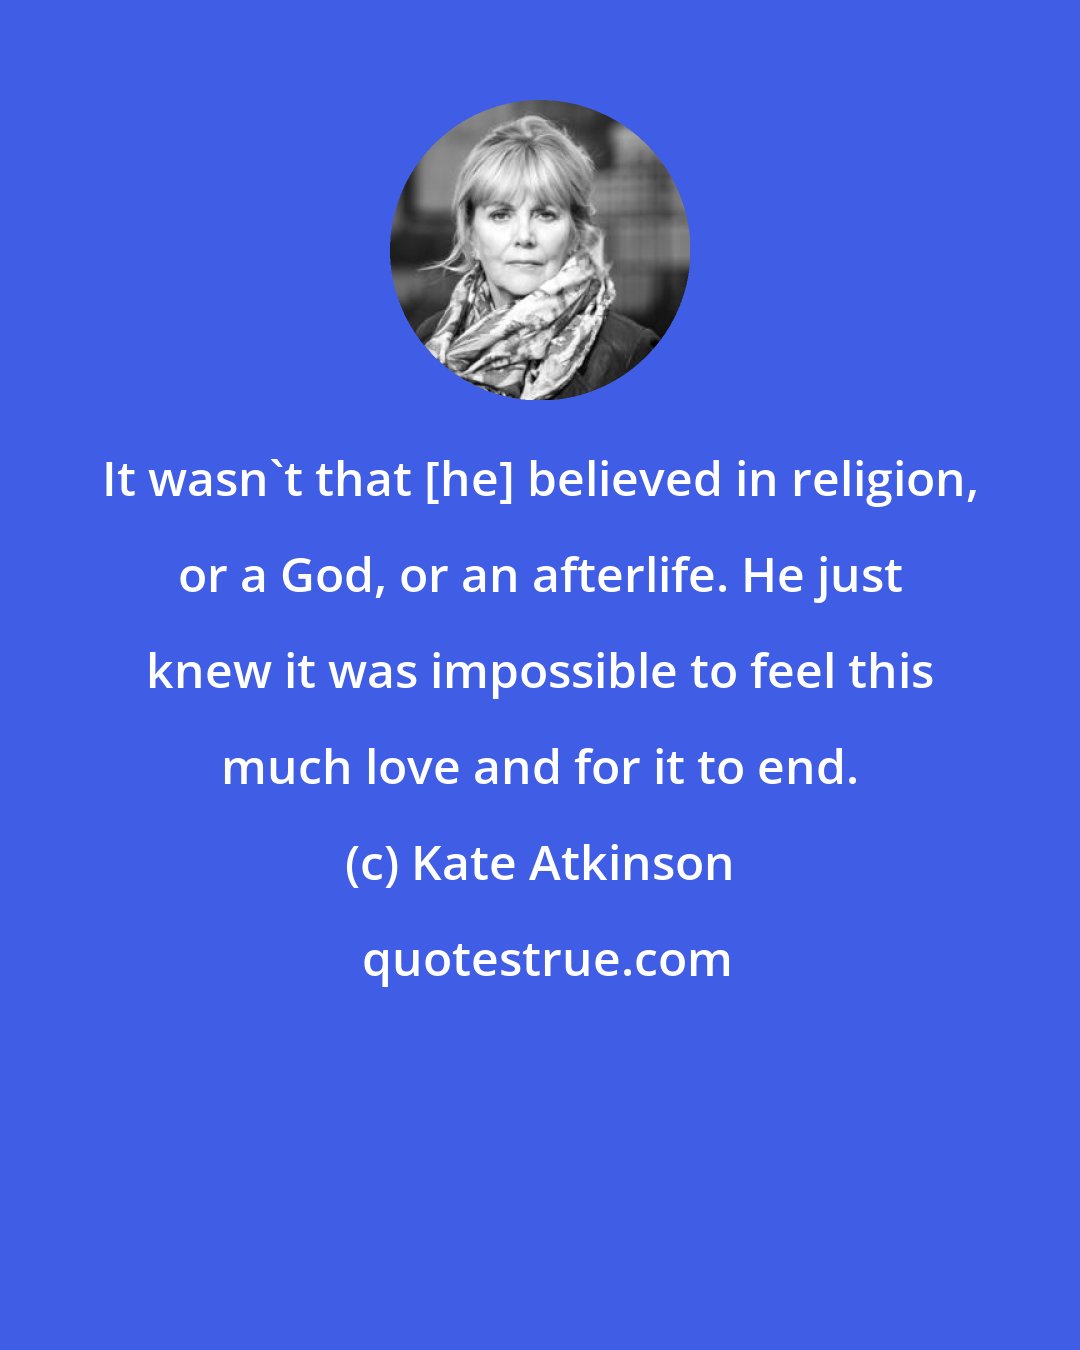 Kate Atkinson: It wasn't that [he] believed in religion, or a God, or an afterlife. He just knew it was impossible to feel this much love and for it to end.